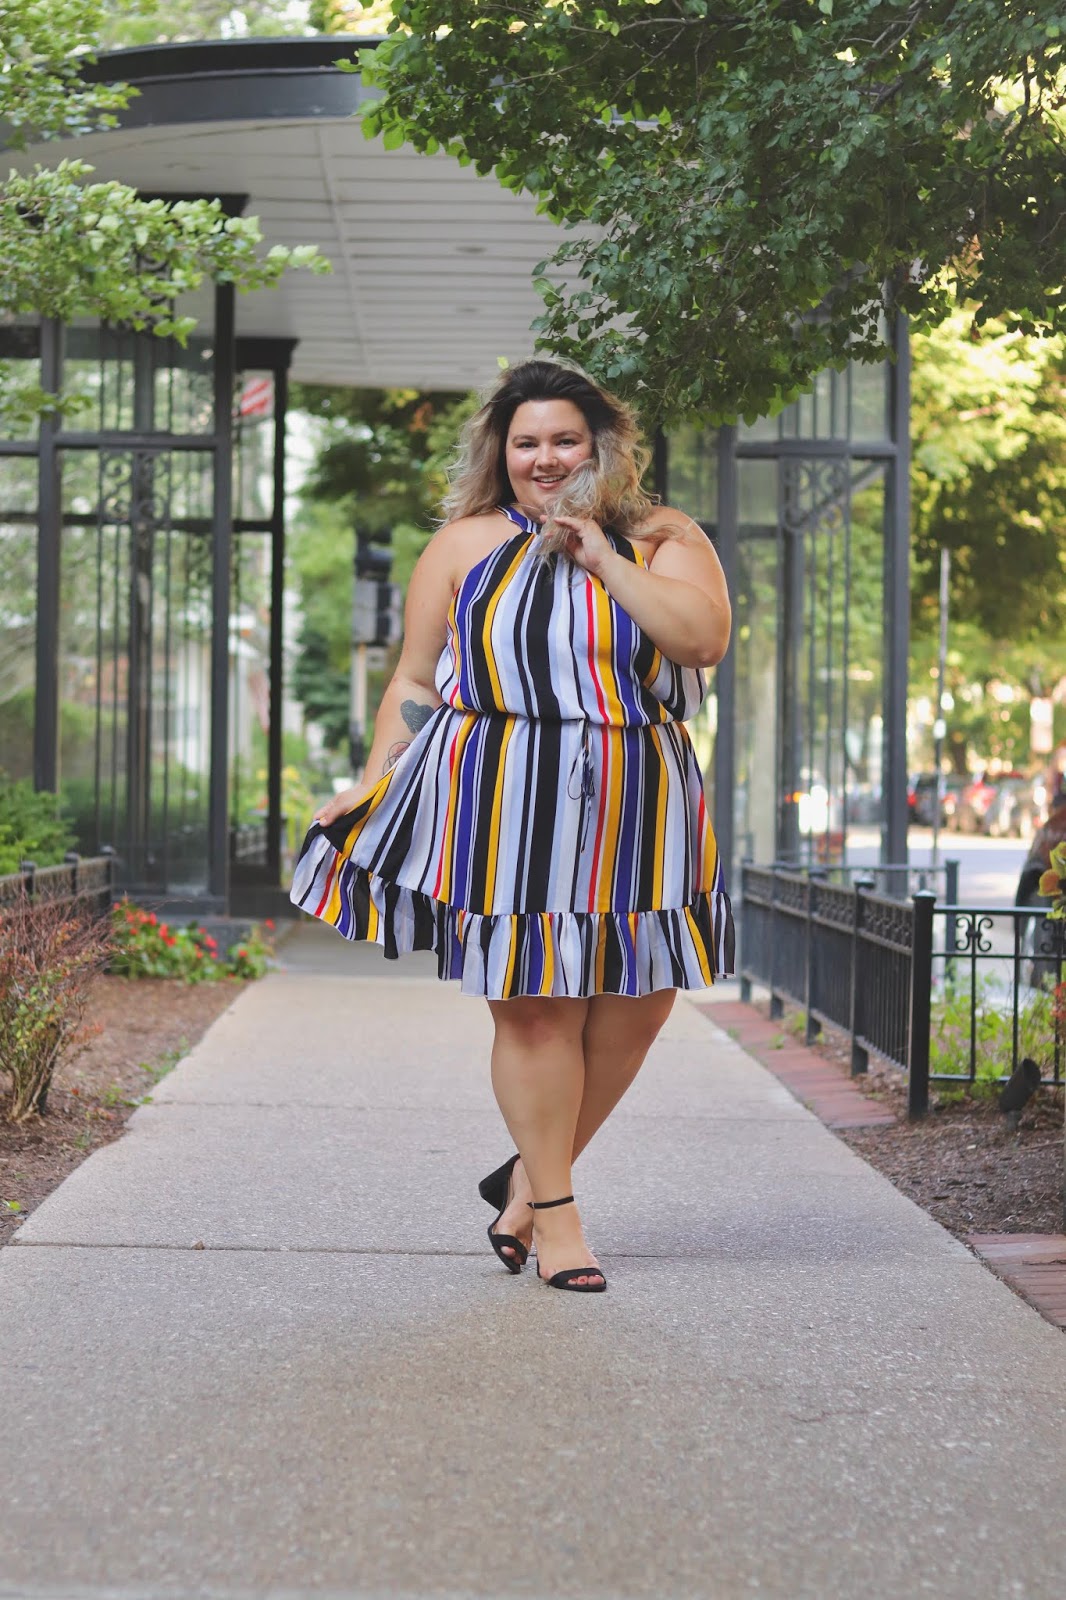 Chicago Plus Size Petite Fashion Blogger Natalie in the City reviews Fashion to Figure's Christel Striped Ruffle Flounce Dress.